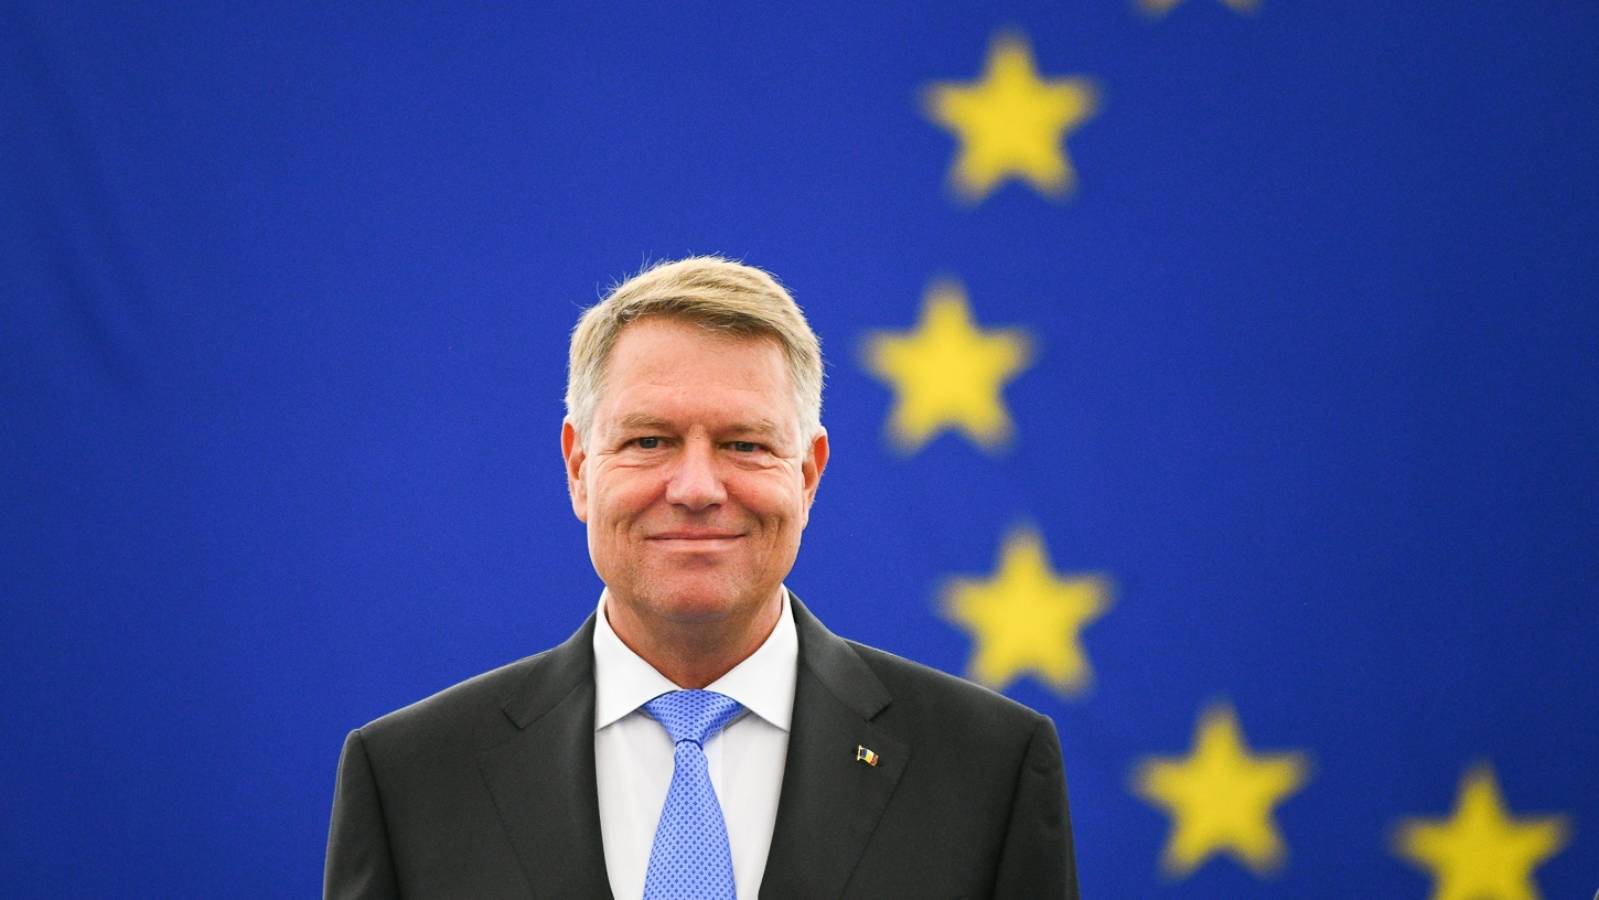 Klaus Iohannis Relaxation measures for June 1 Discussed today